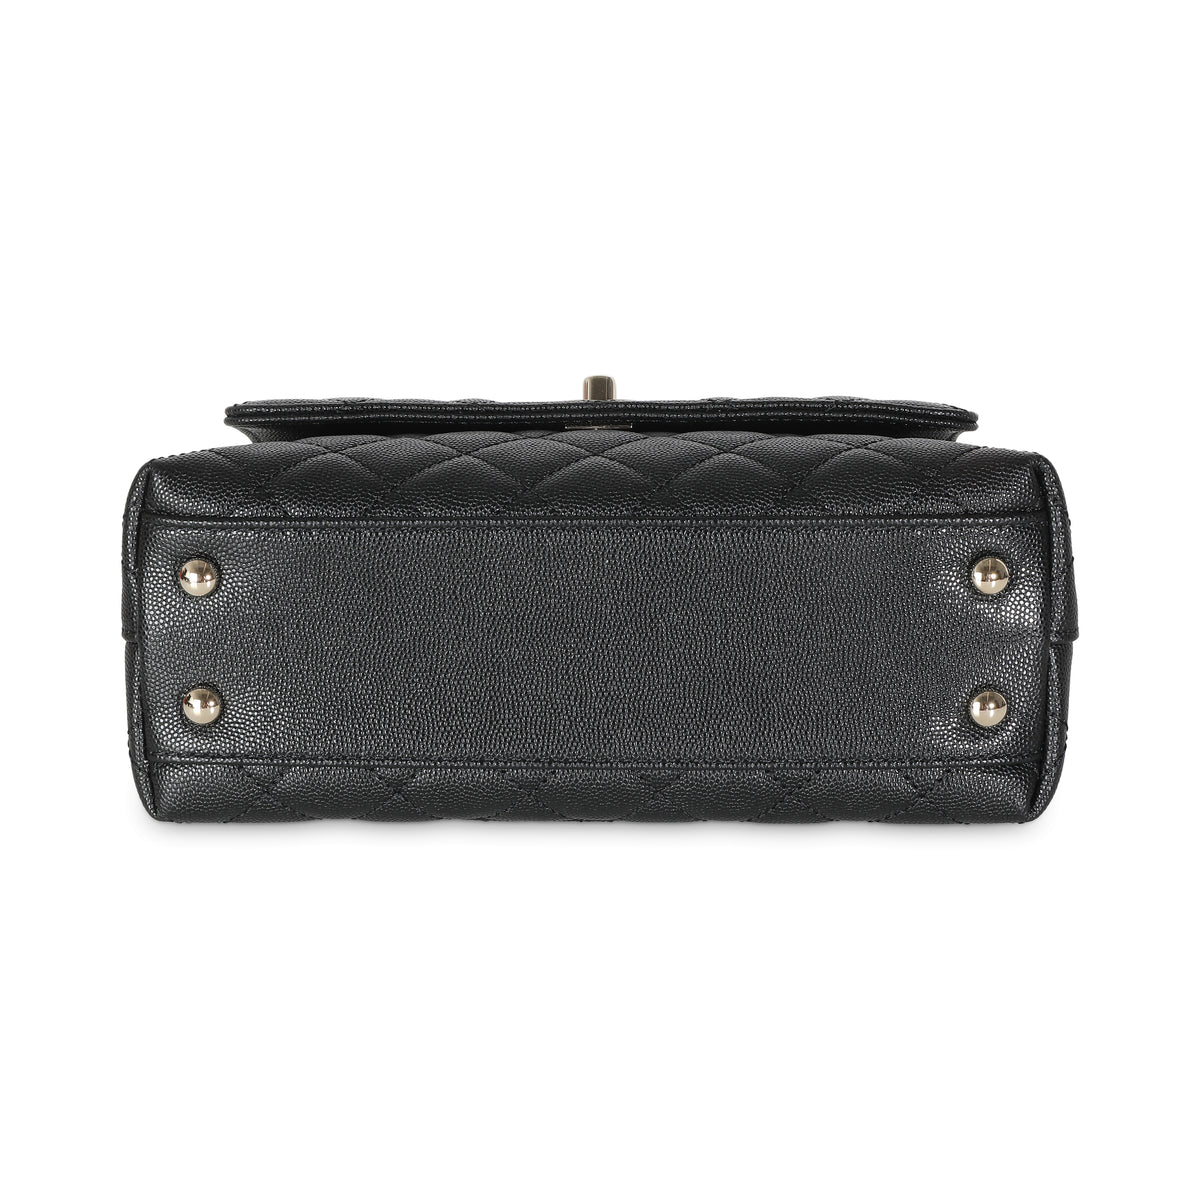 Black Quilted Caviar Mini Coco Top Handle Bag